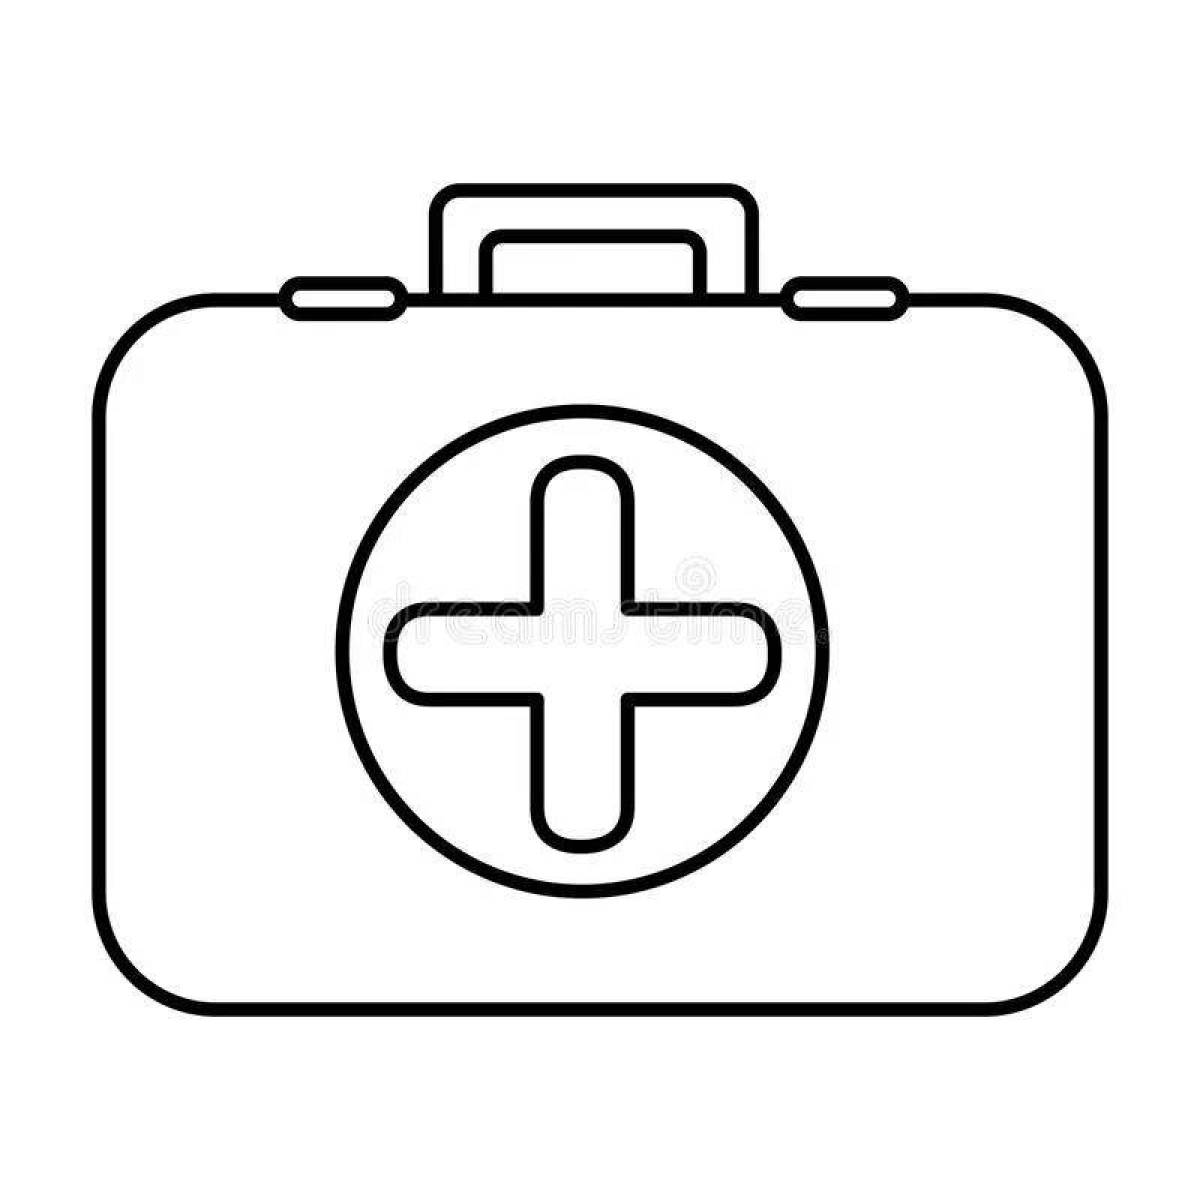 Fascinating first aid kit coloring page